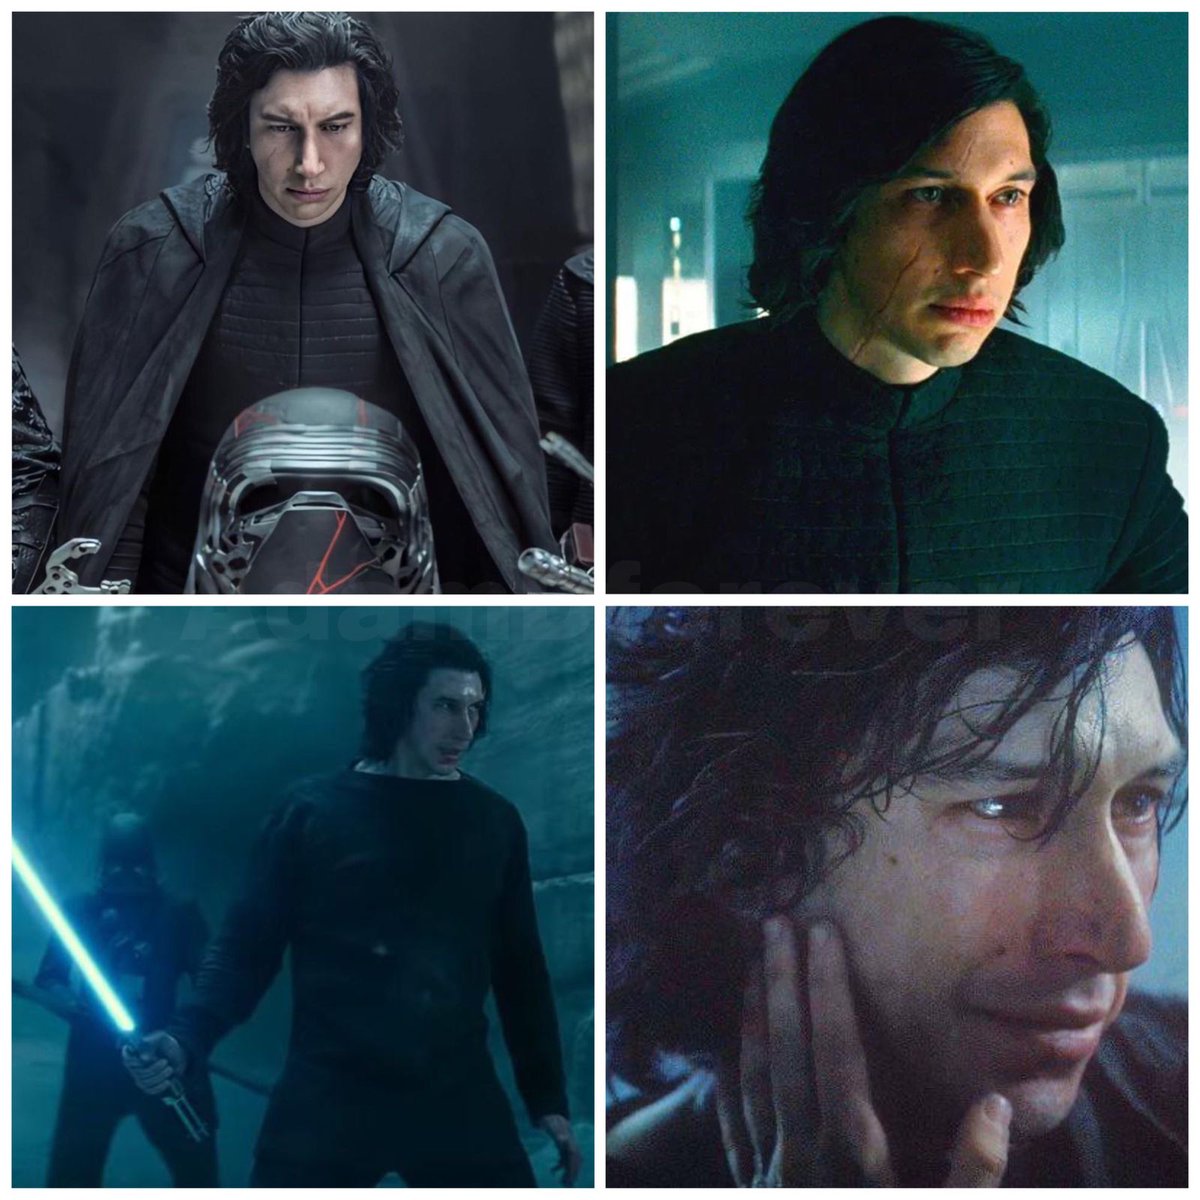 Happy May the 4th to the best character in the franchise! #Maythe4thBeWithYou #StarWarsDay #StarWars #KyloRen #BenSolo